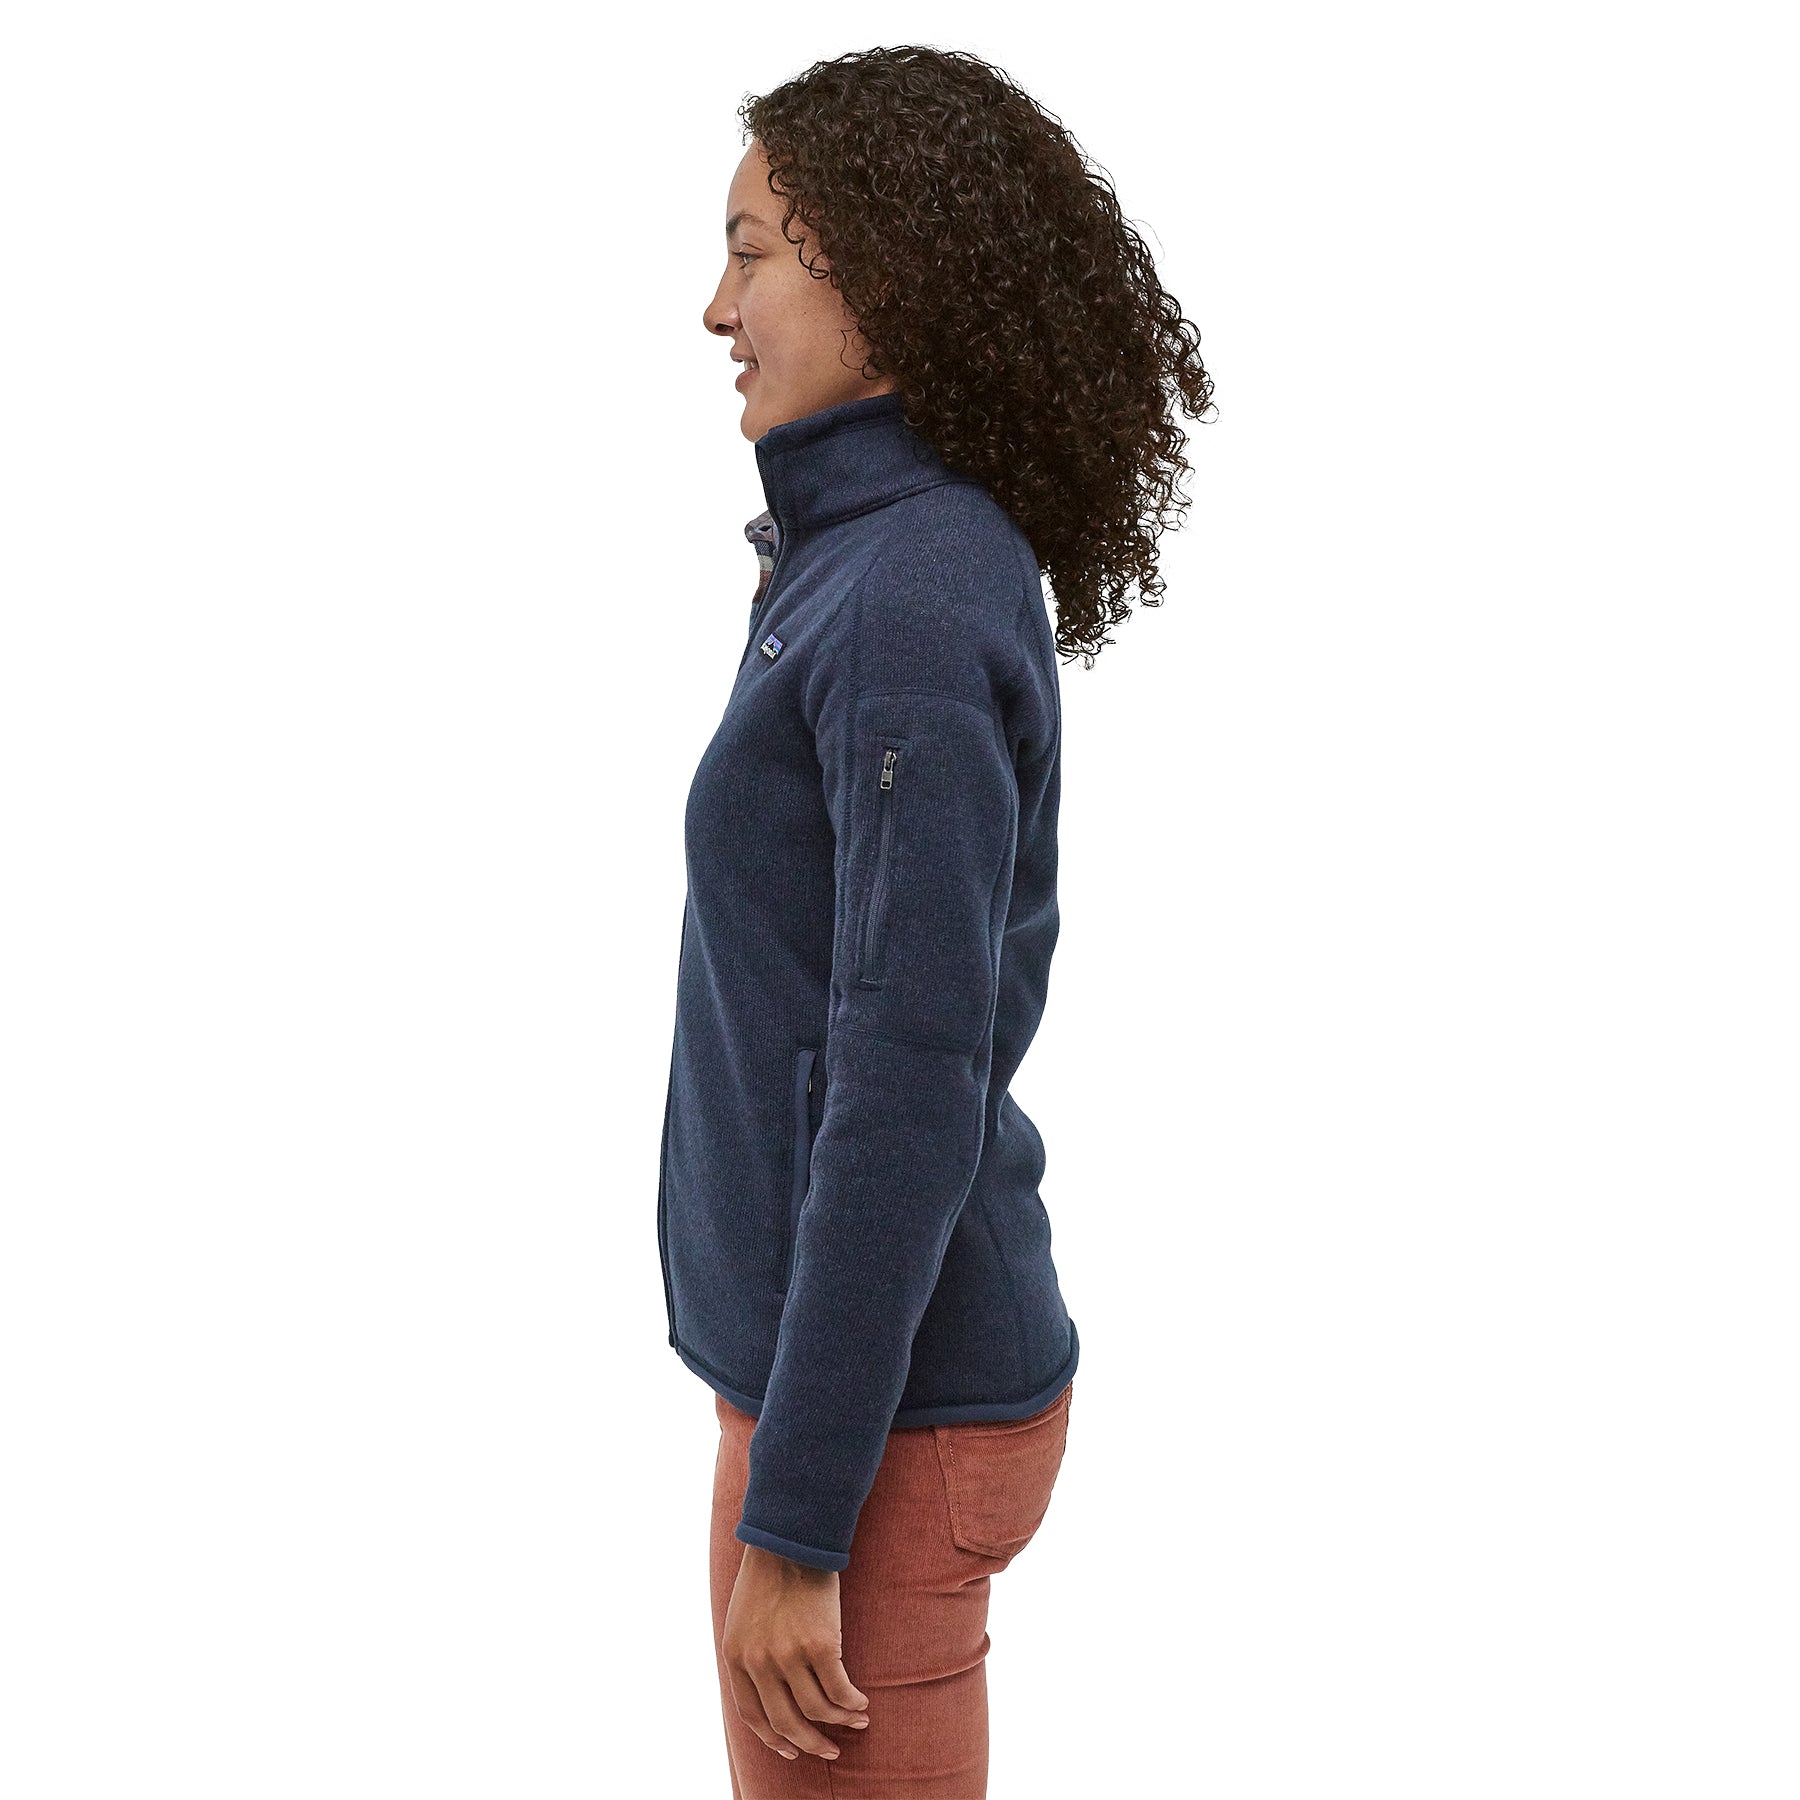 Better Sweater Fleece Jacket - Womens F23 - Forests, Tides, and